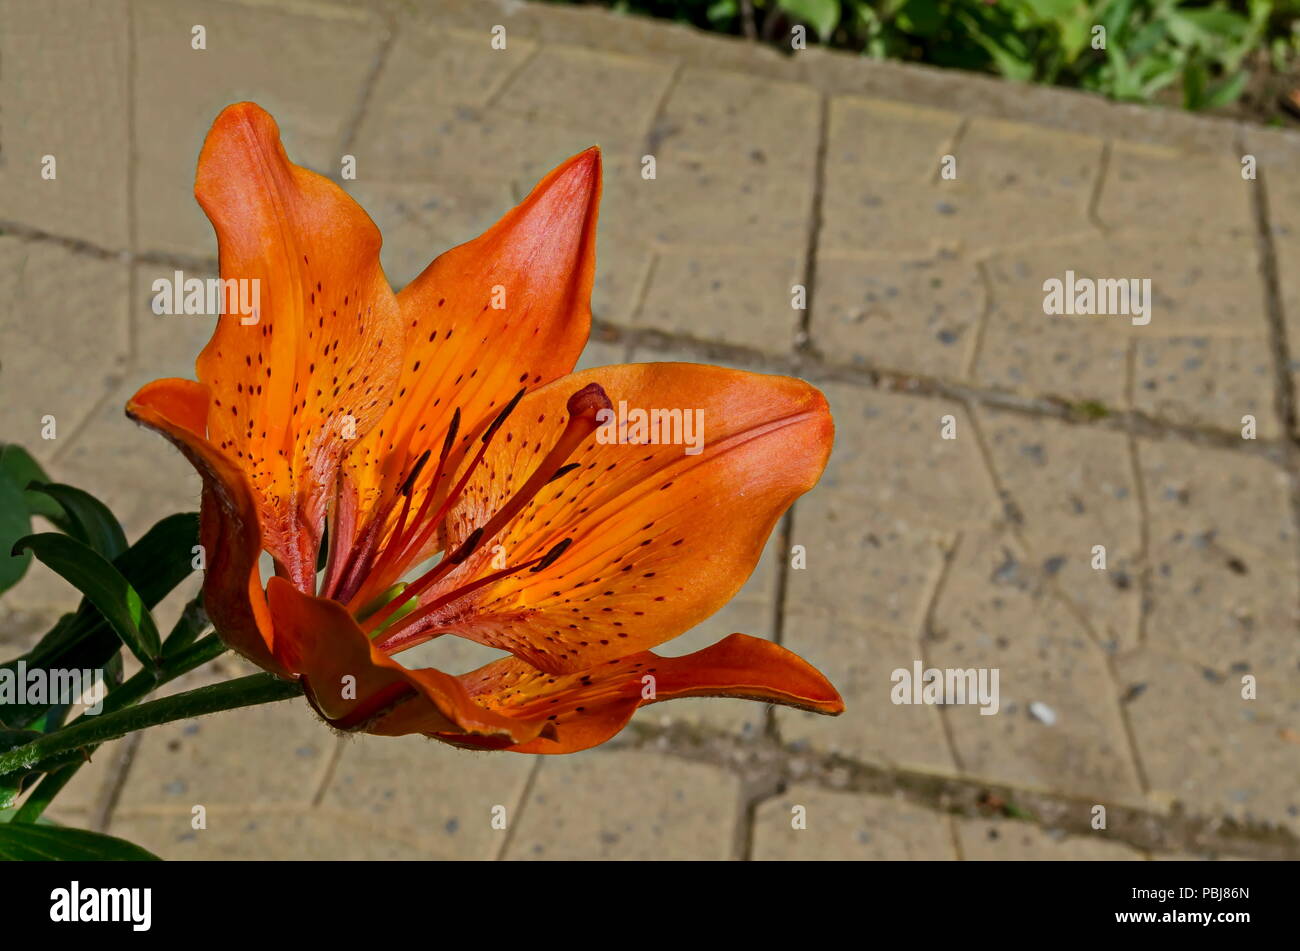 Red orange Tiger Lily or Tiger Lilium  flower blooming in a garden, district Drujba, Sofia, Bulgaria Stock Photo